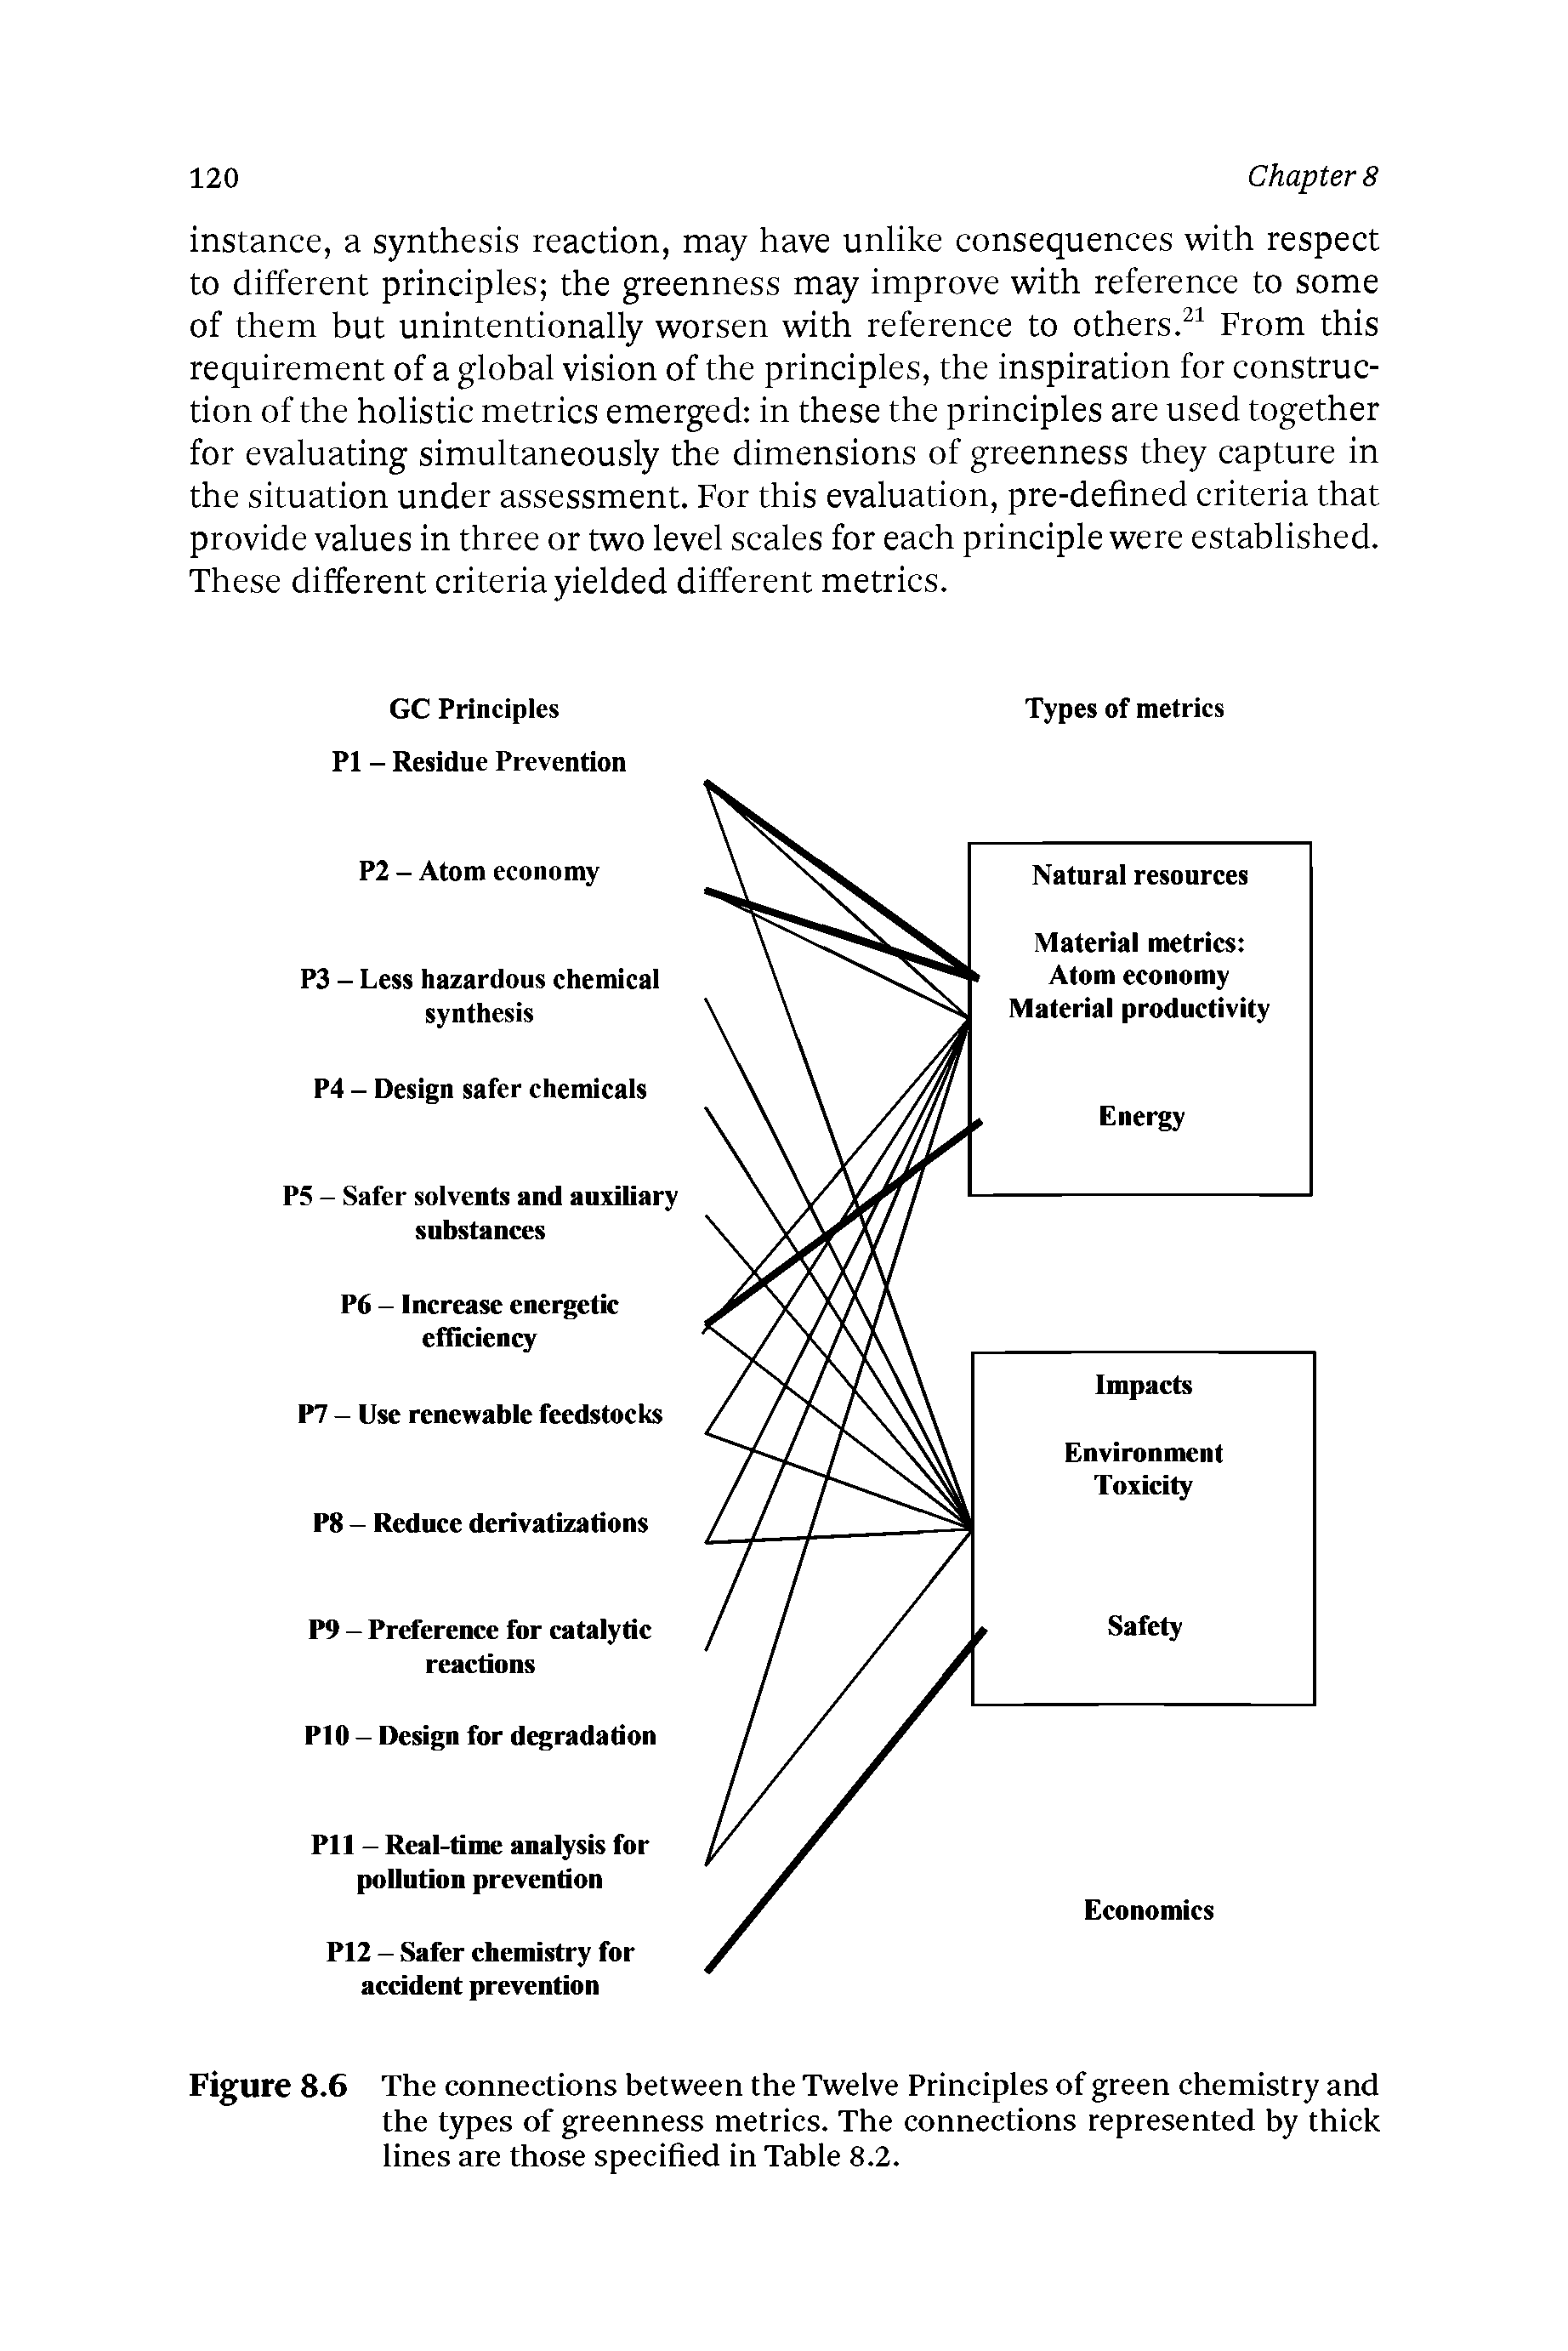 Figure 8.6 The connections between the Twelve Principles of green chemistry and the types of greenness metrics. The connections represented by thick lines are those specified in Table 8.2.